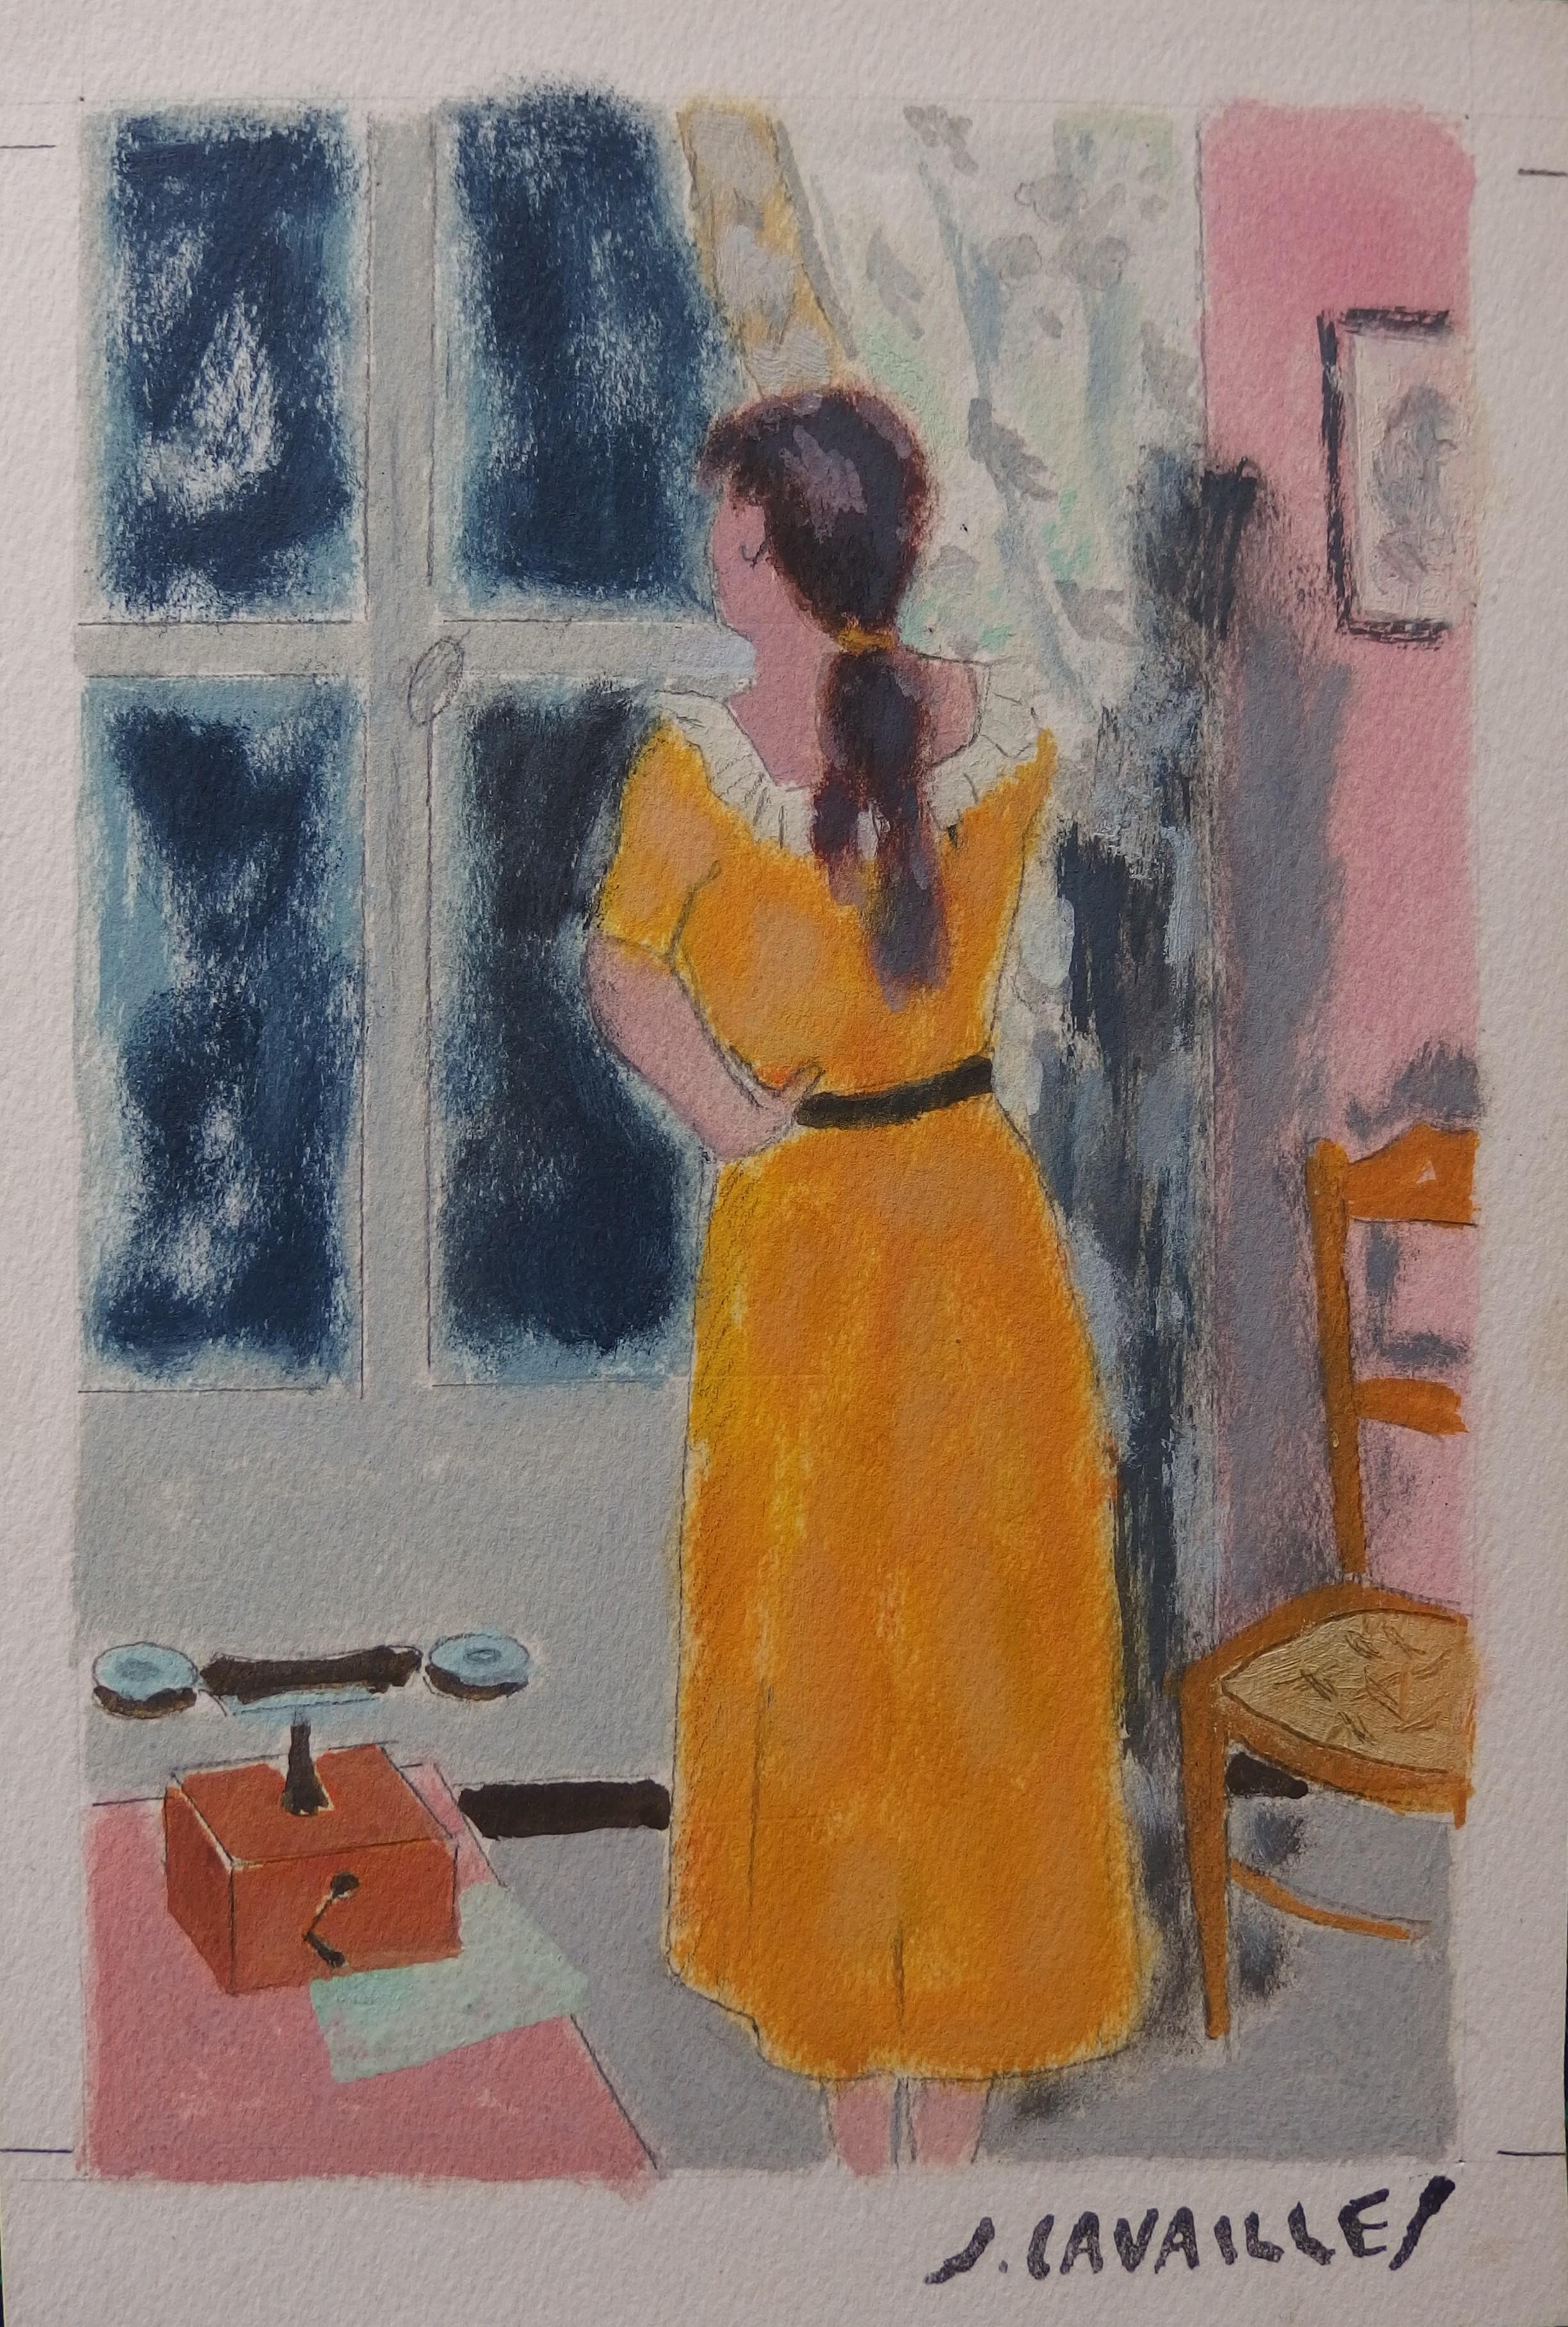 Woman Looking at the Window - Original painting, Handsigned